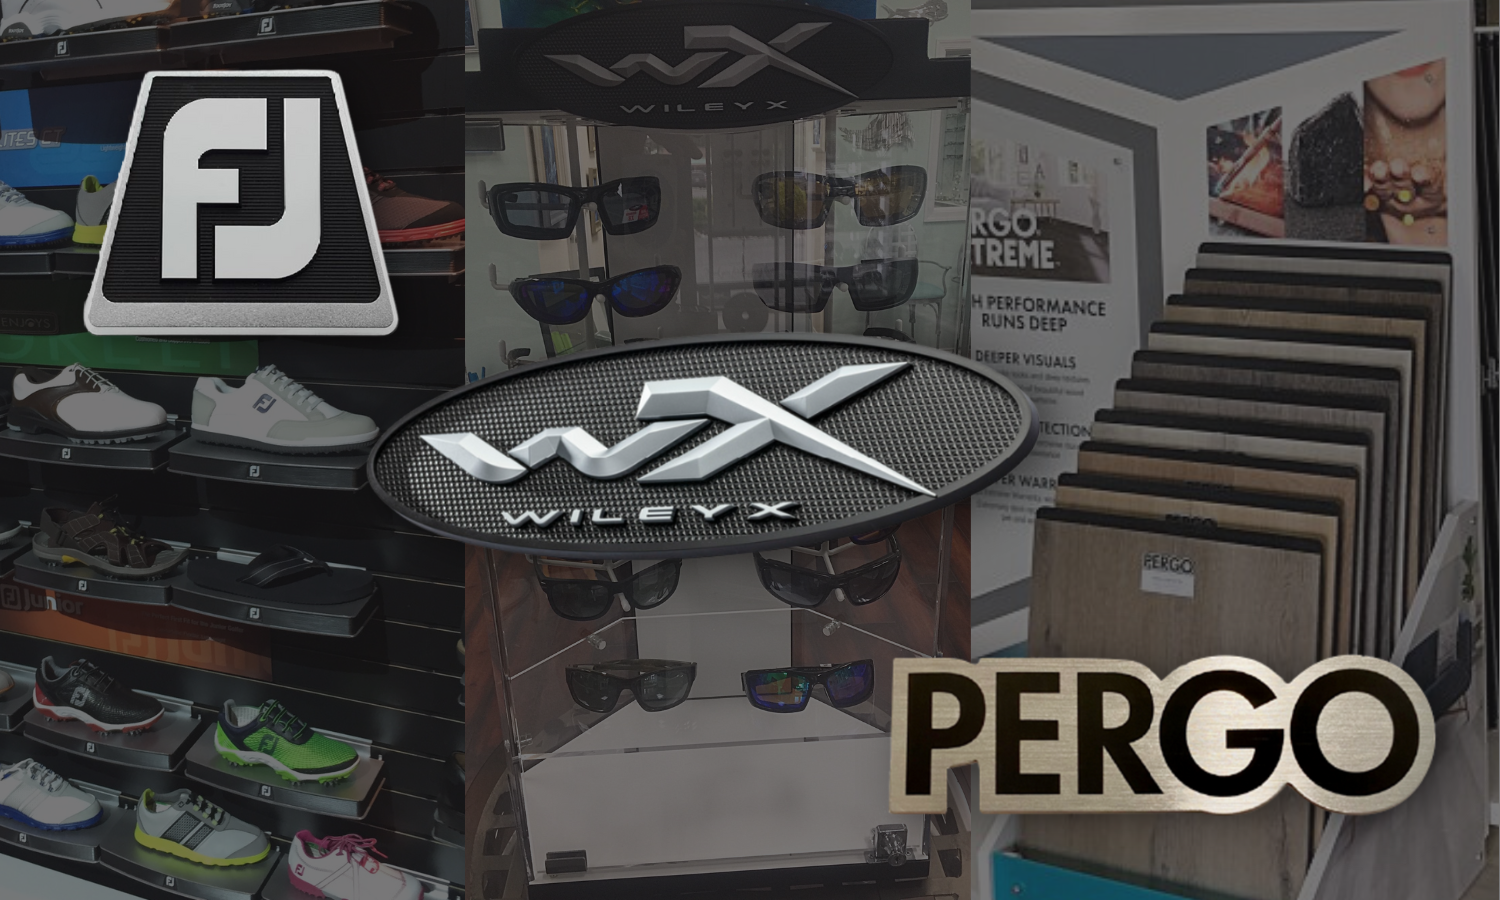 retail displays:  golf shoes on shelves with footjoy logo scaled to overlay it; sunglasses case displayed with wiley x logo scaled to overlay it; hardwood flooring sampled displayed with Pergo logo scaled to overlay it